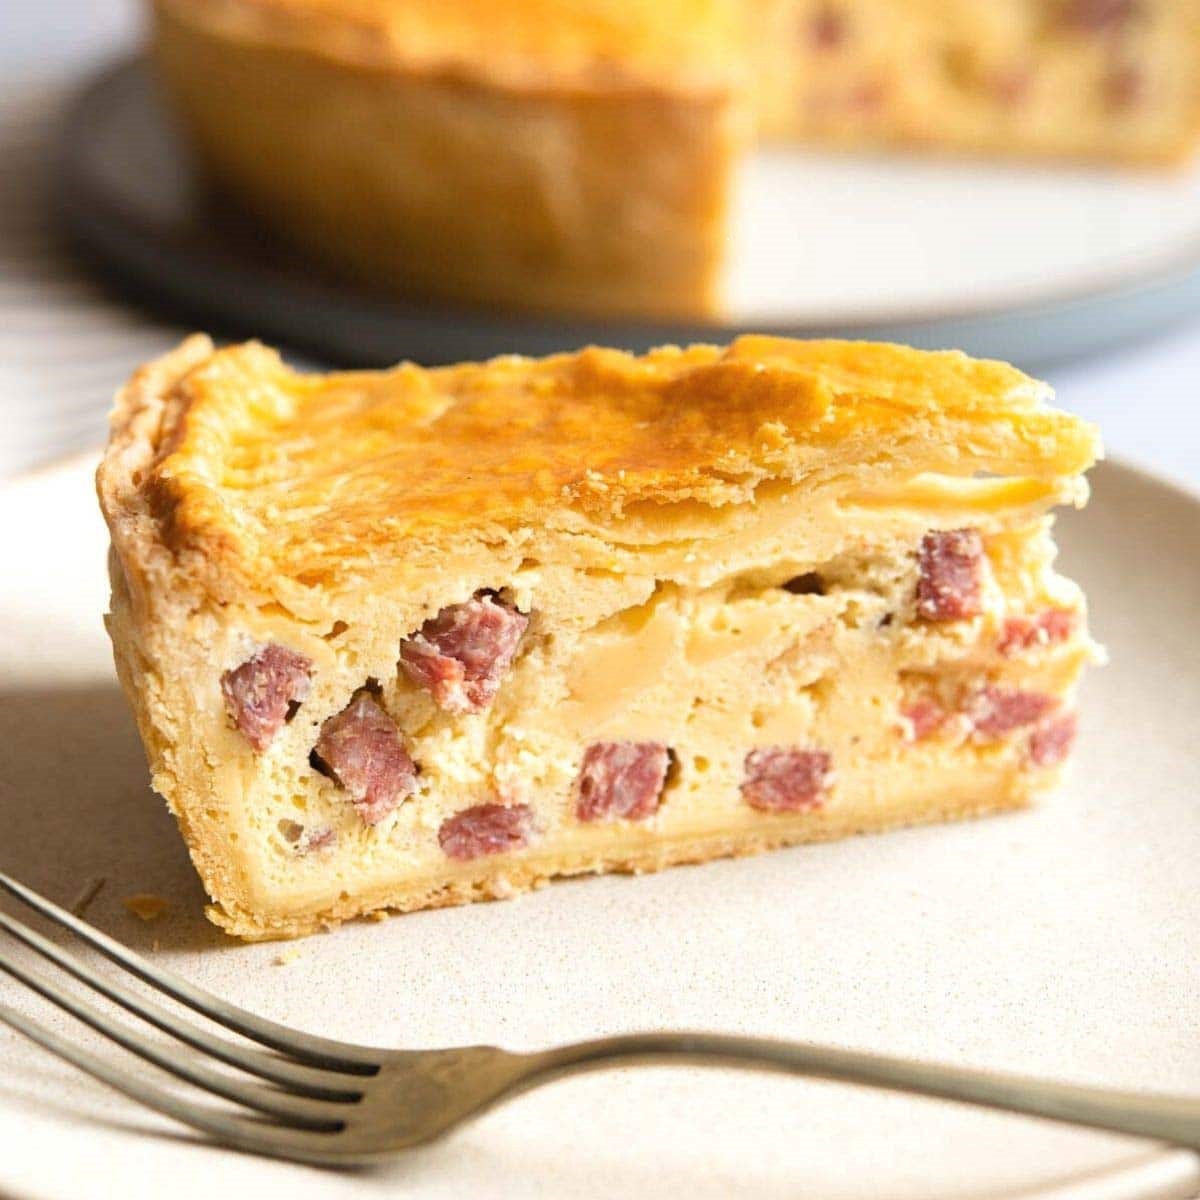 Easter Pie or Pizza Rustica.